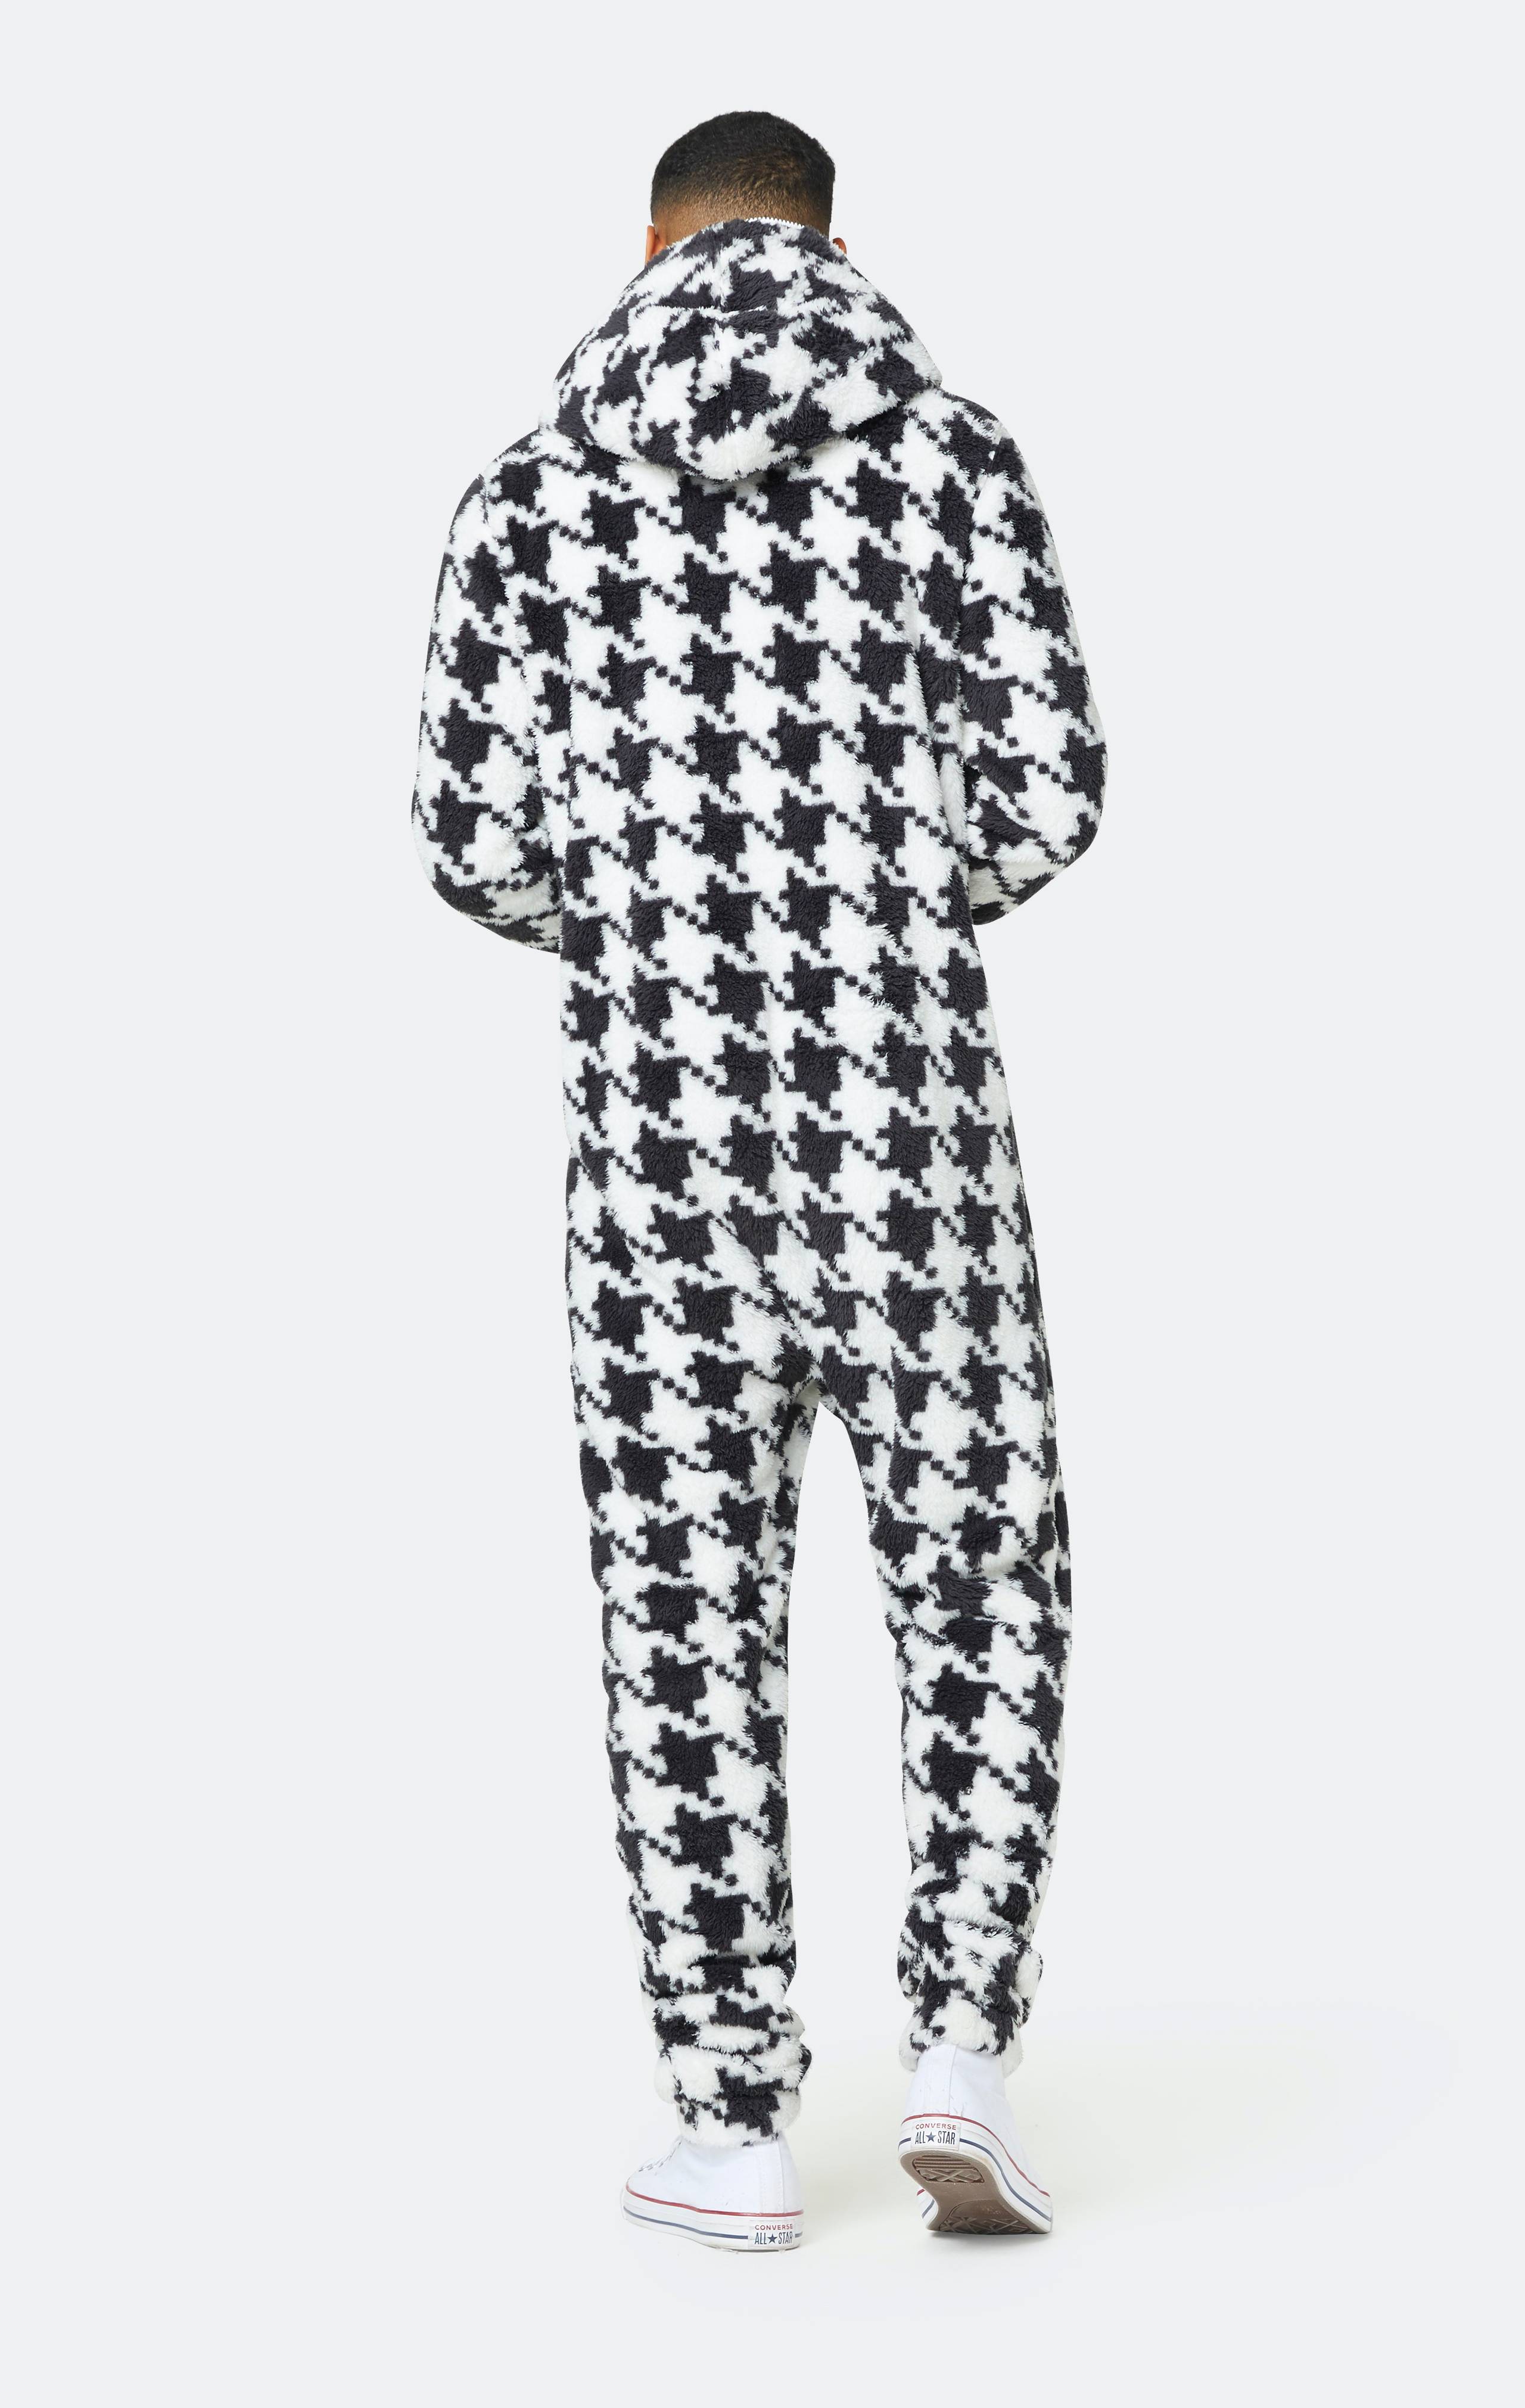 Onepiece The New Puppy Jumpsuit Houndsthooth - 4